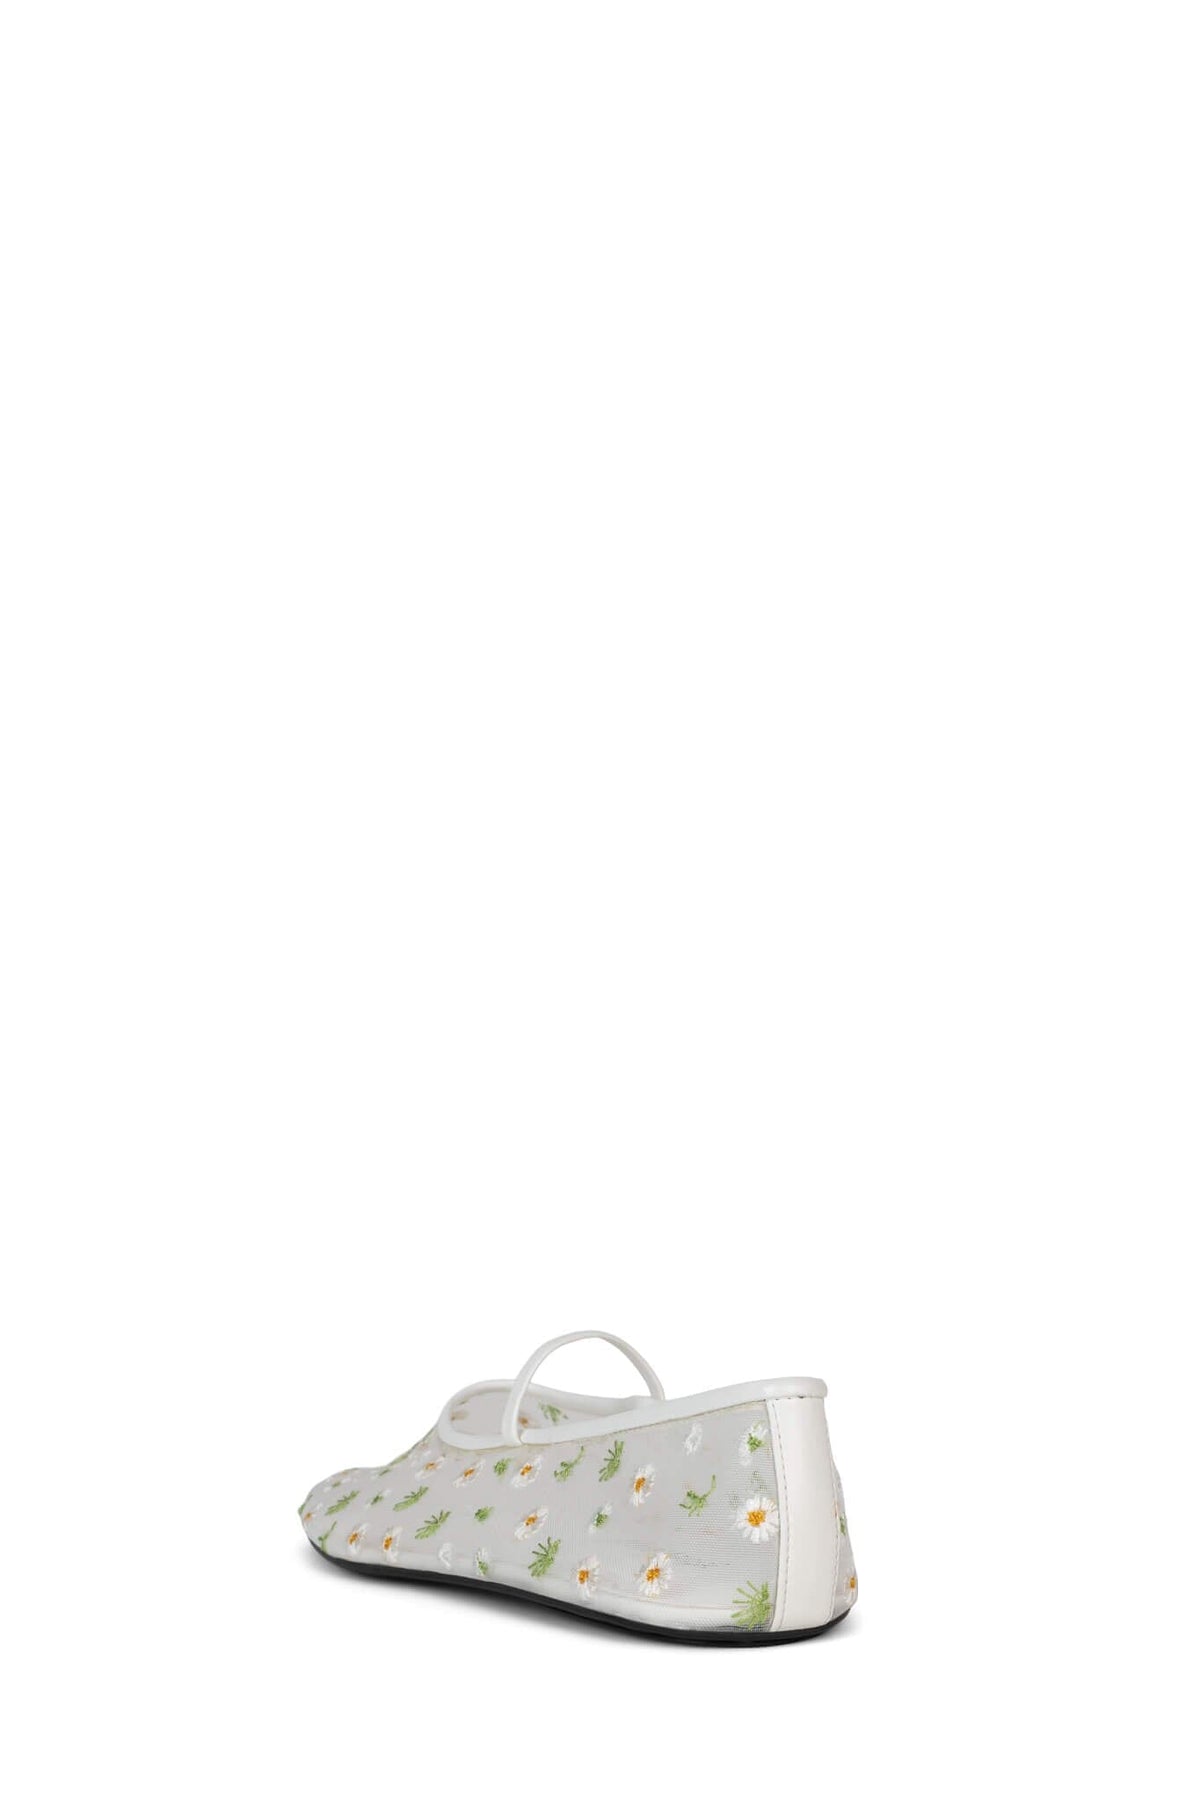 DANCER-EMB Jeffrey Campbell Flat Mary Janes White Daisies